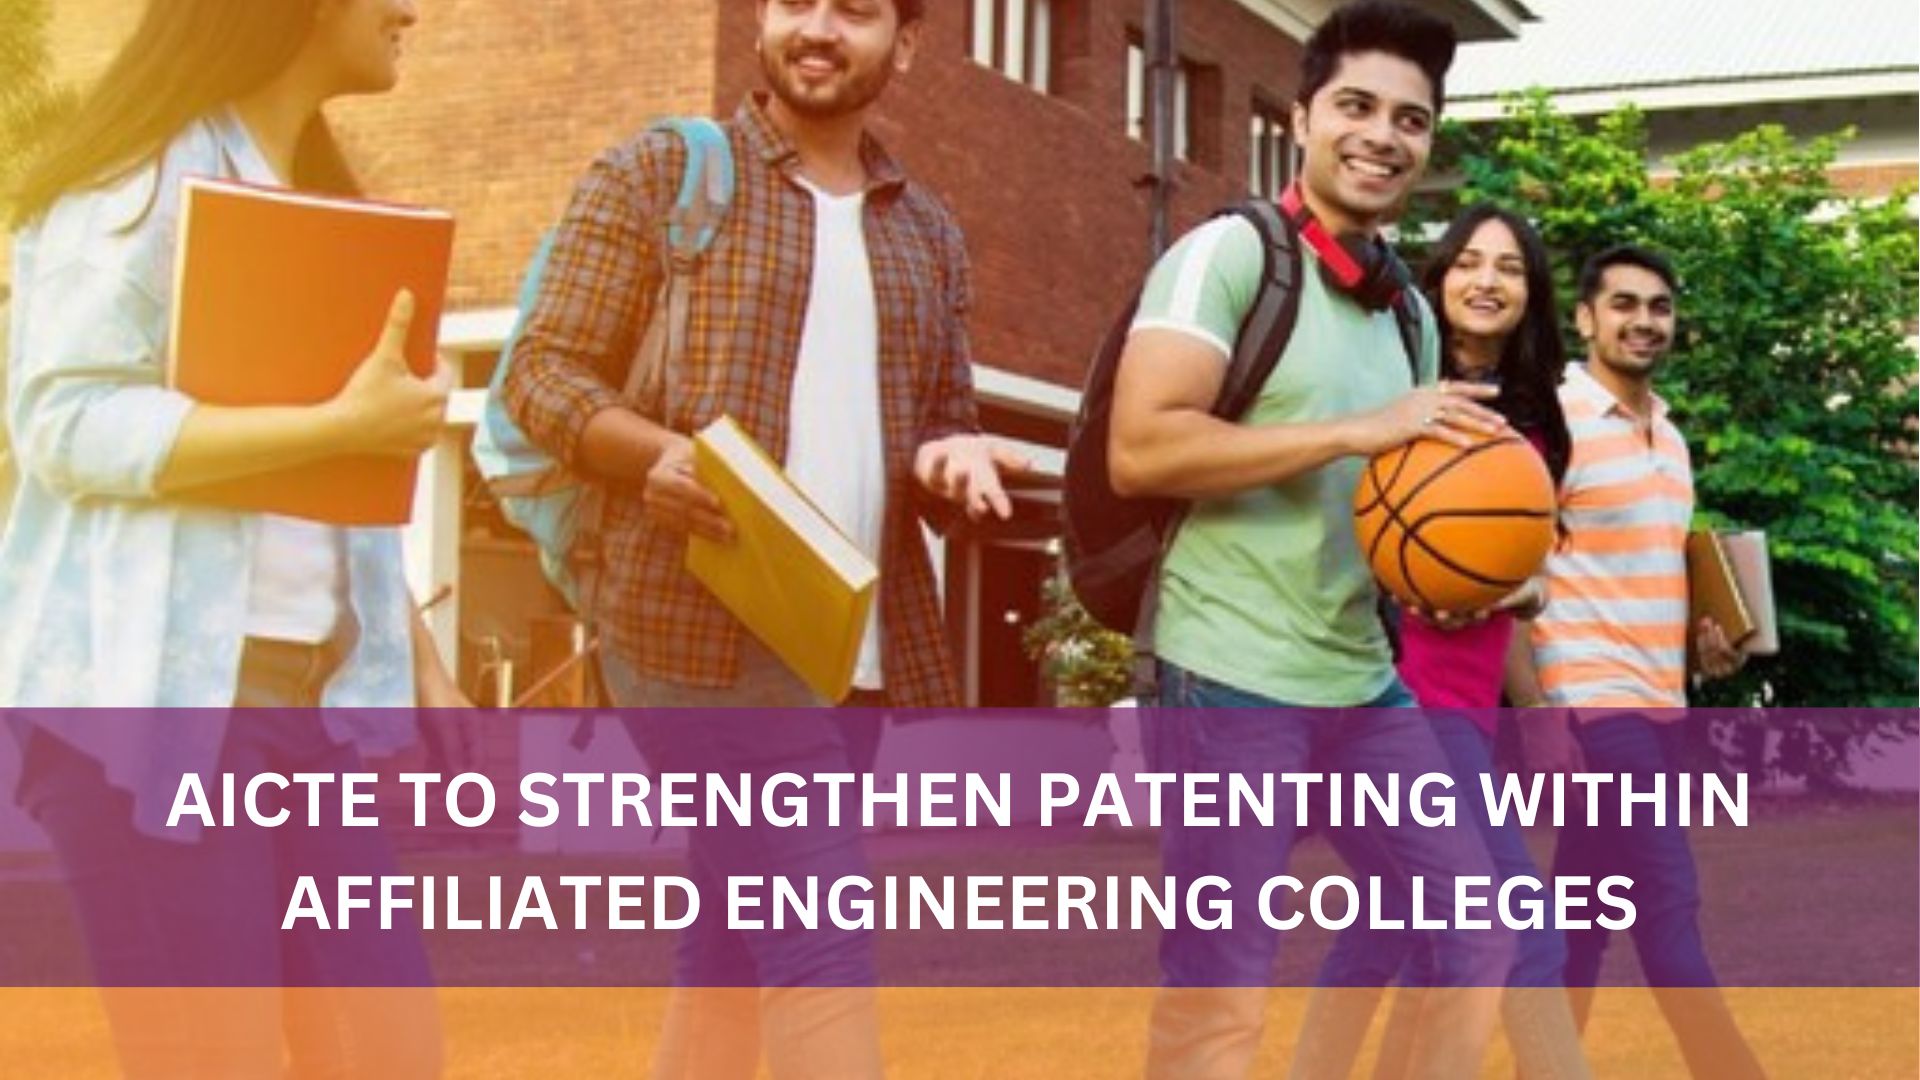 AICTE TO STRENGTHEN PATENTING WITHIN AFFILIATED ENGINEERING COLLEGES